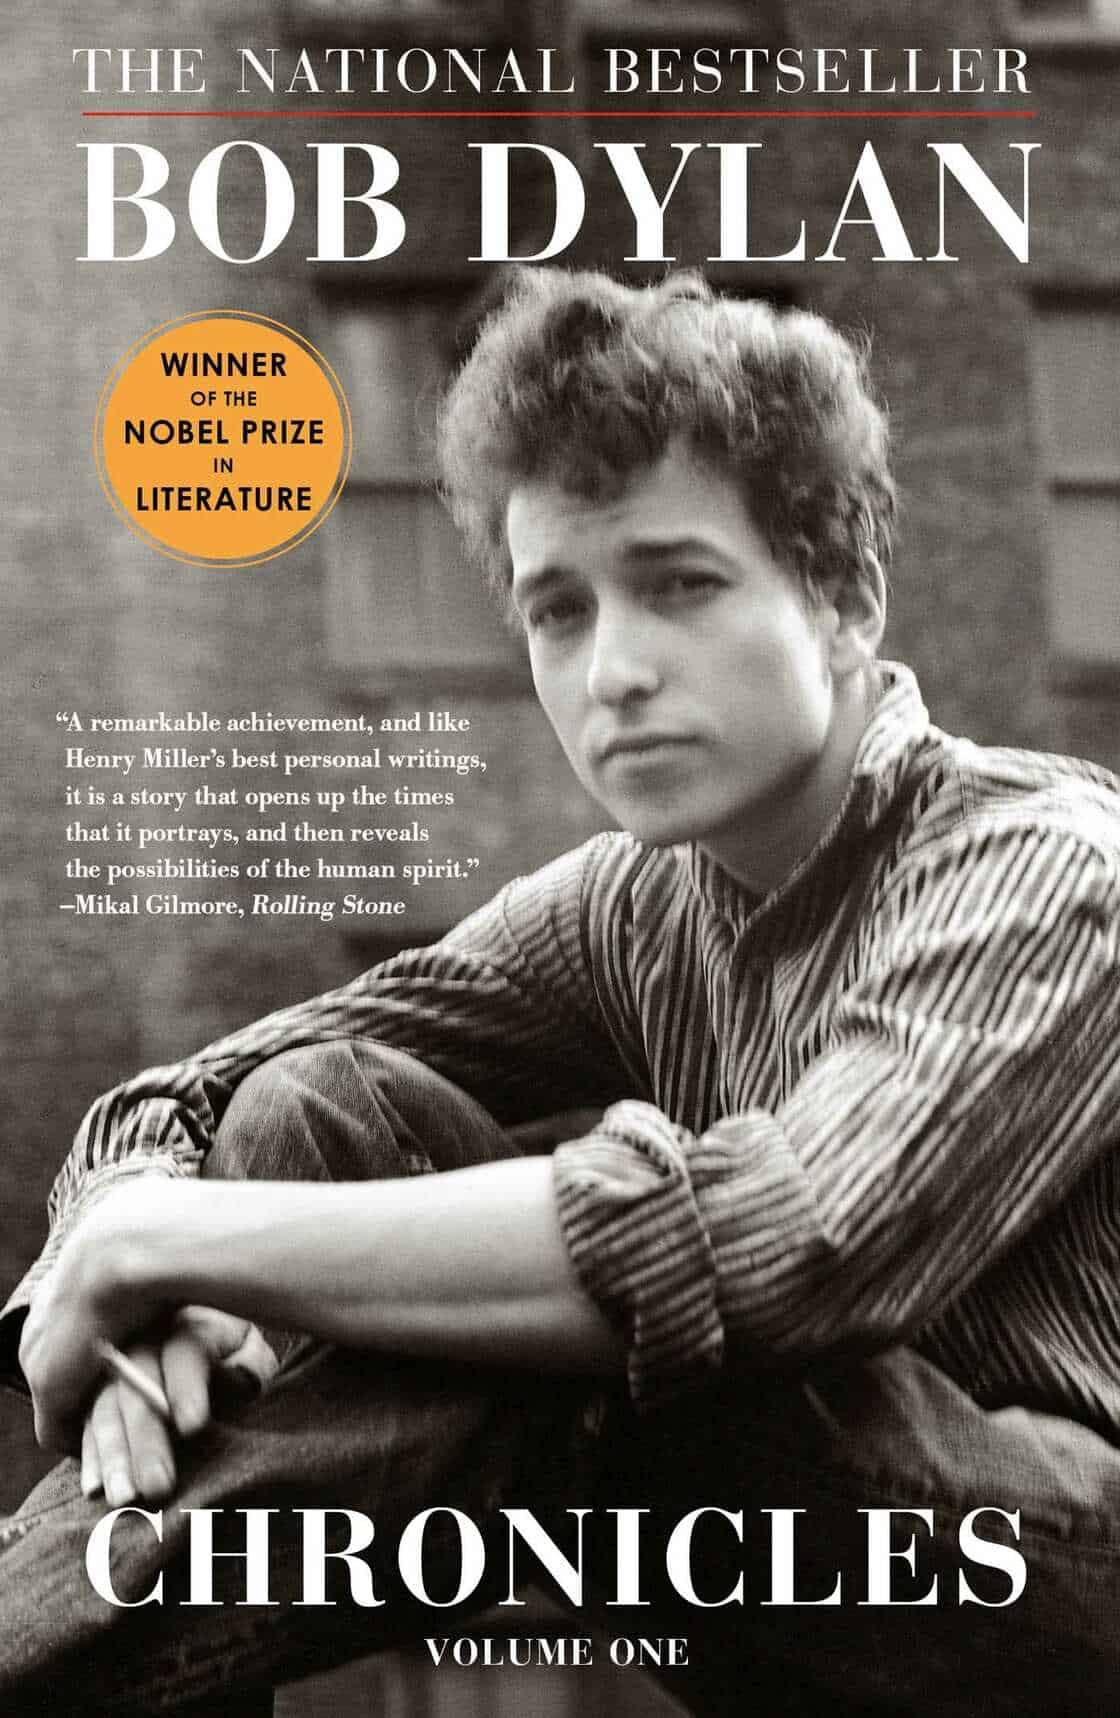 Chronicles, Vol 1 by Bob Dylan book cover